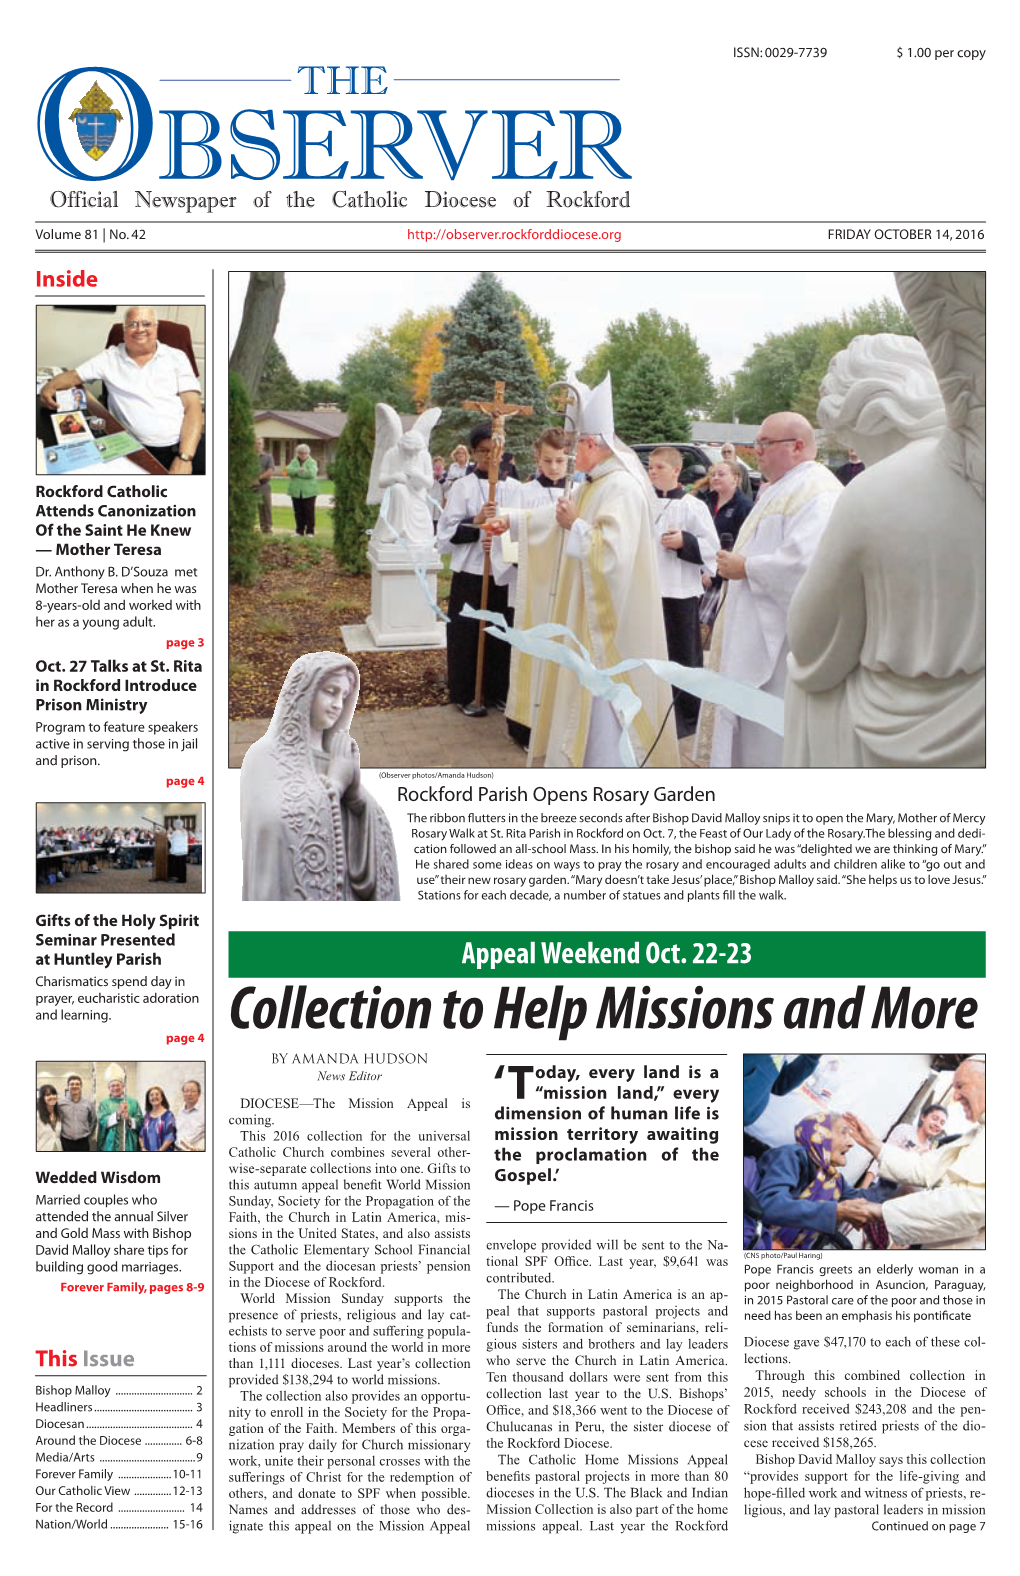 Collection to Help Missions and More Page 4 by Amanda Hudson News Editor Oday, Every Land Is a “Mission Land,” Every DIOCESE—The Mission Appeal Is ‘T Coming